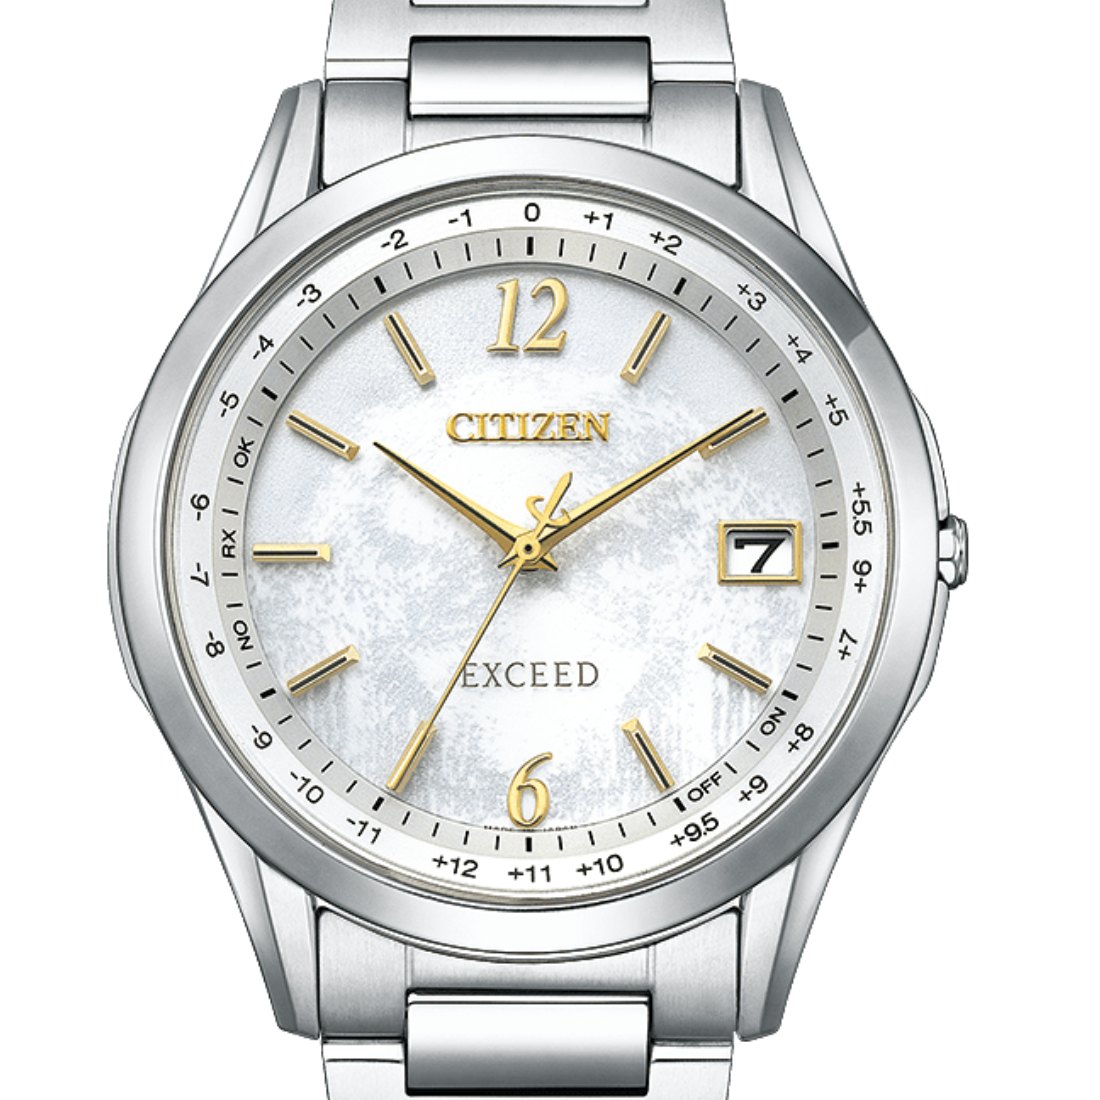 Citizen Exceed Limited Edition CB1110-70A Photovoltaic Eco-Drive White Dial Watch